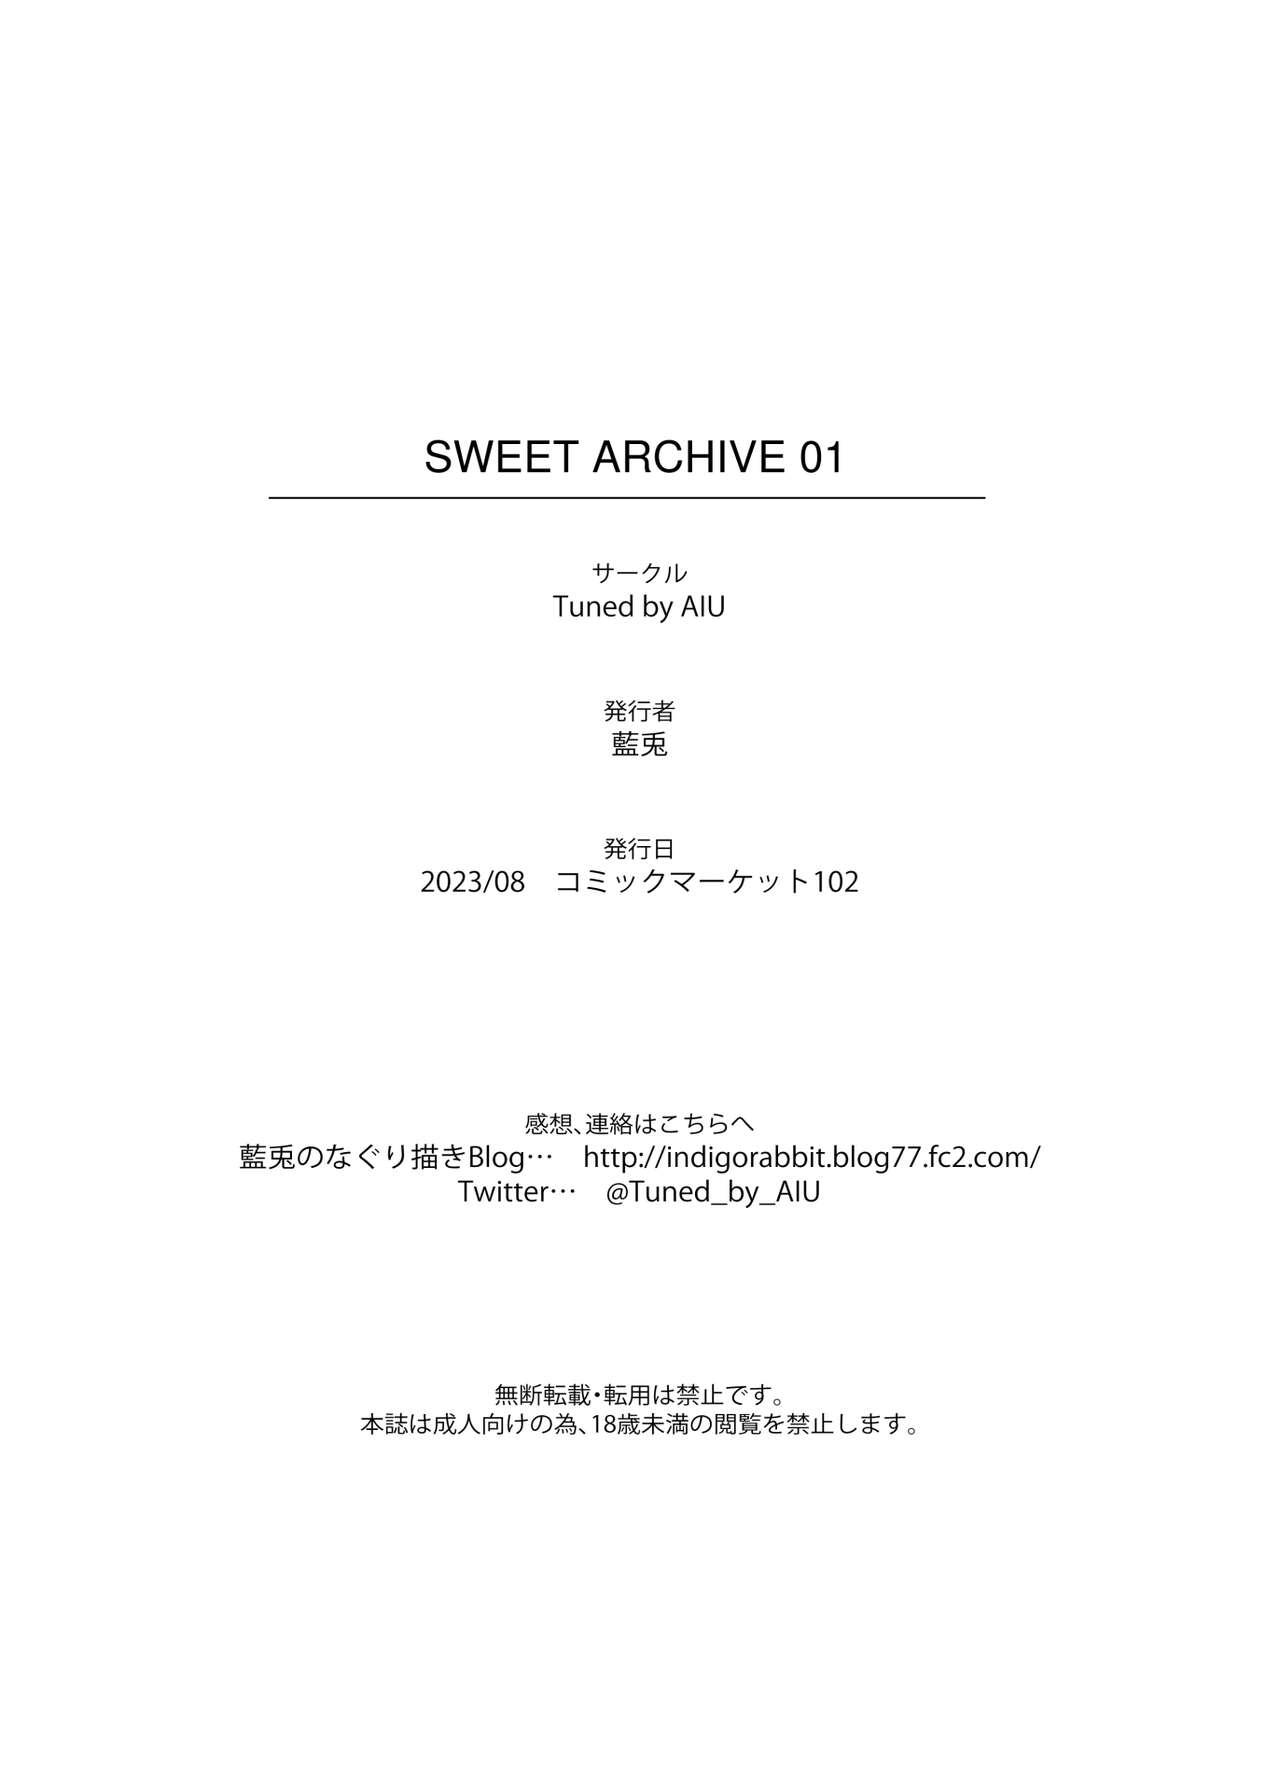 SWEET ARCHIVE 01 15